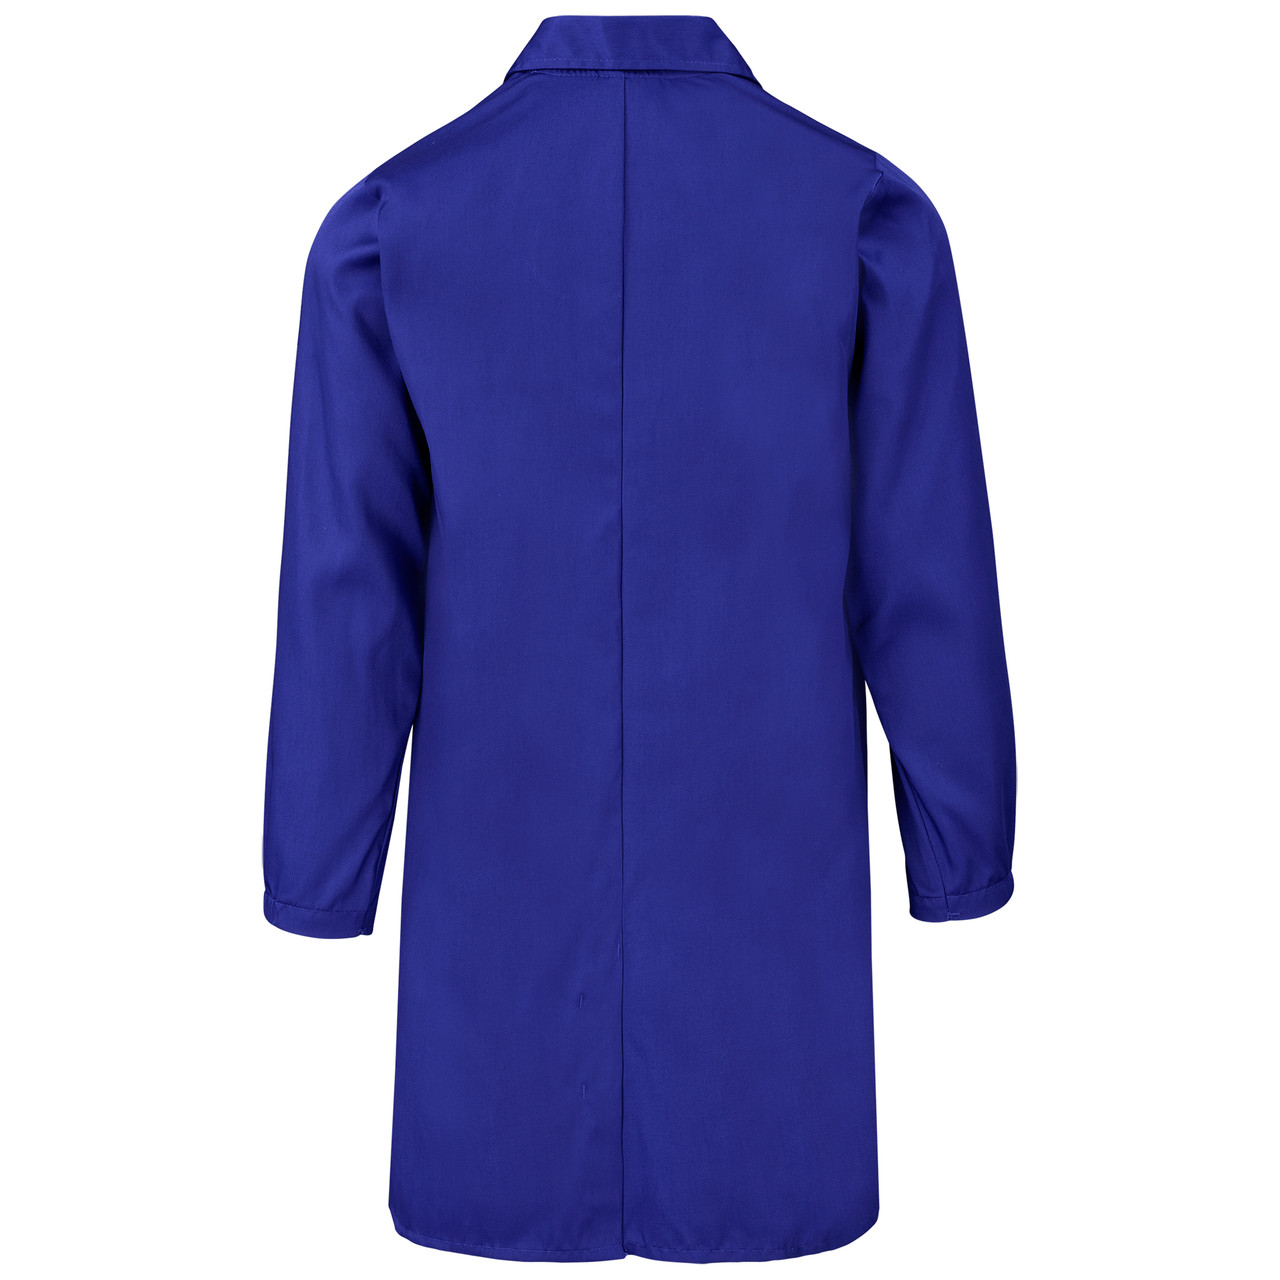 HACCP Dust Coats | Food Safety Coat | Azulwear Cape Town, South Africa